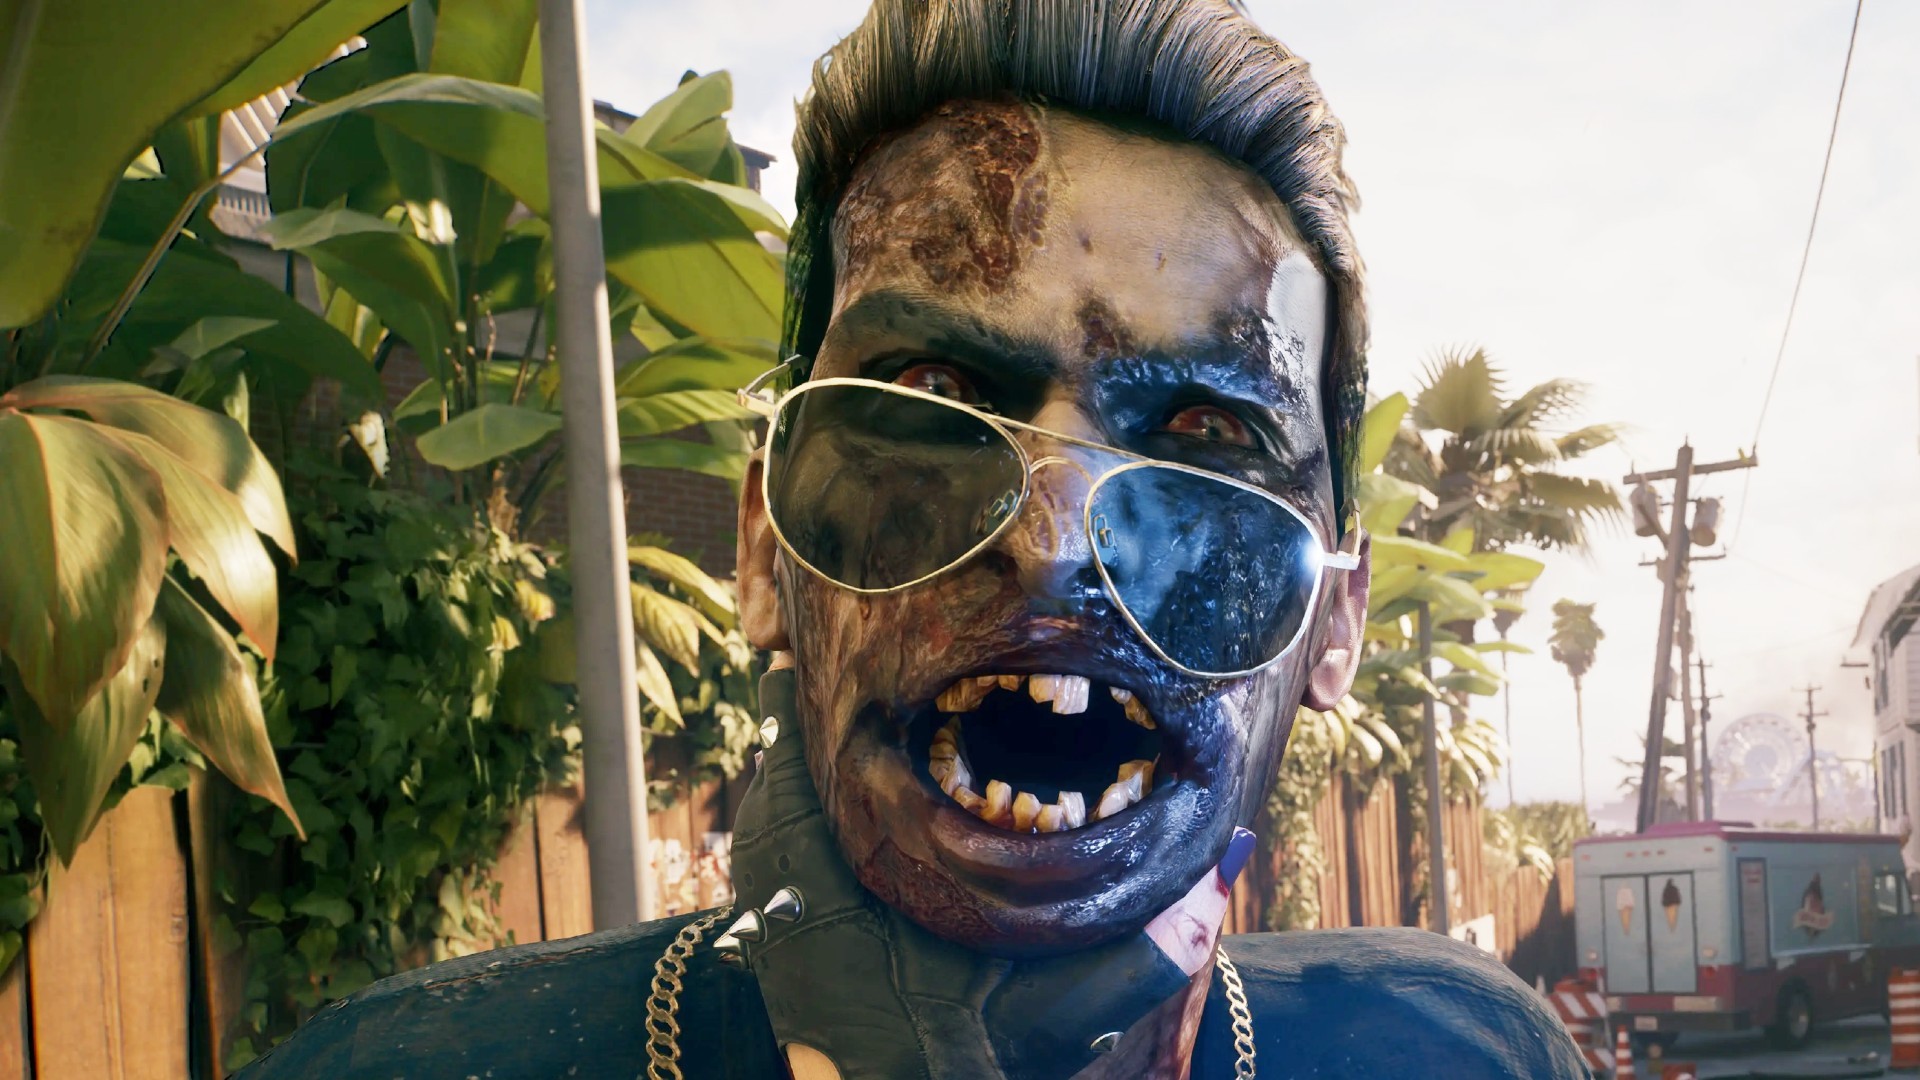 Dead Island 2 gameplay preview – take me back to the City of Zombies